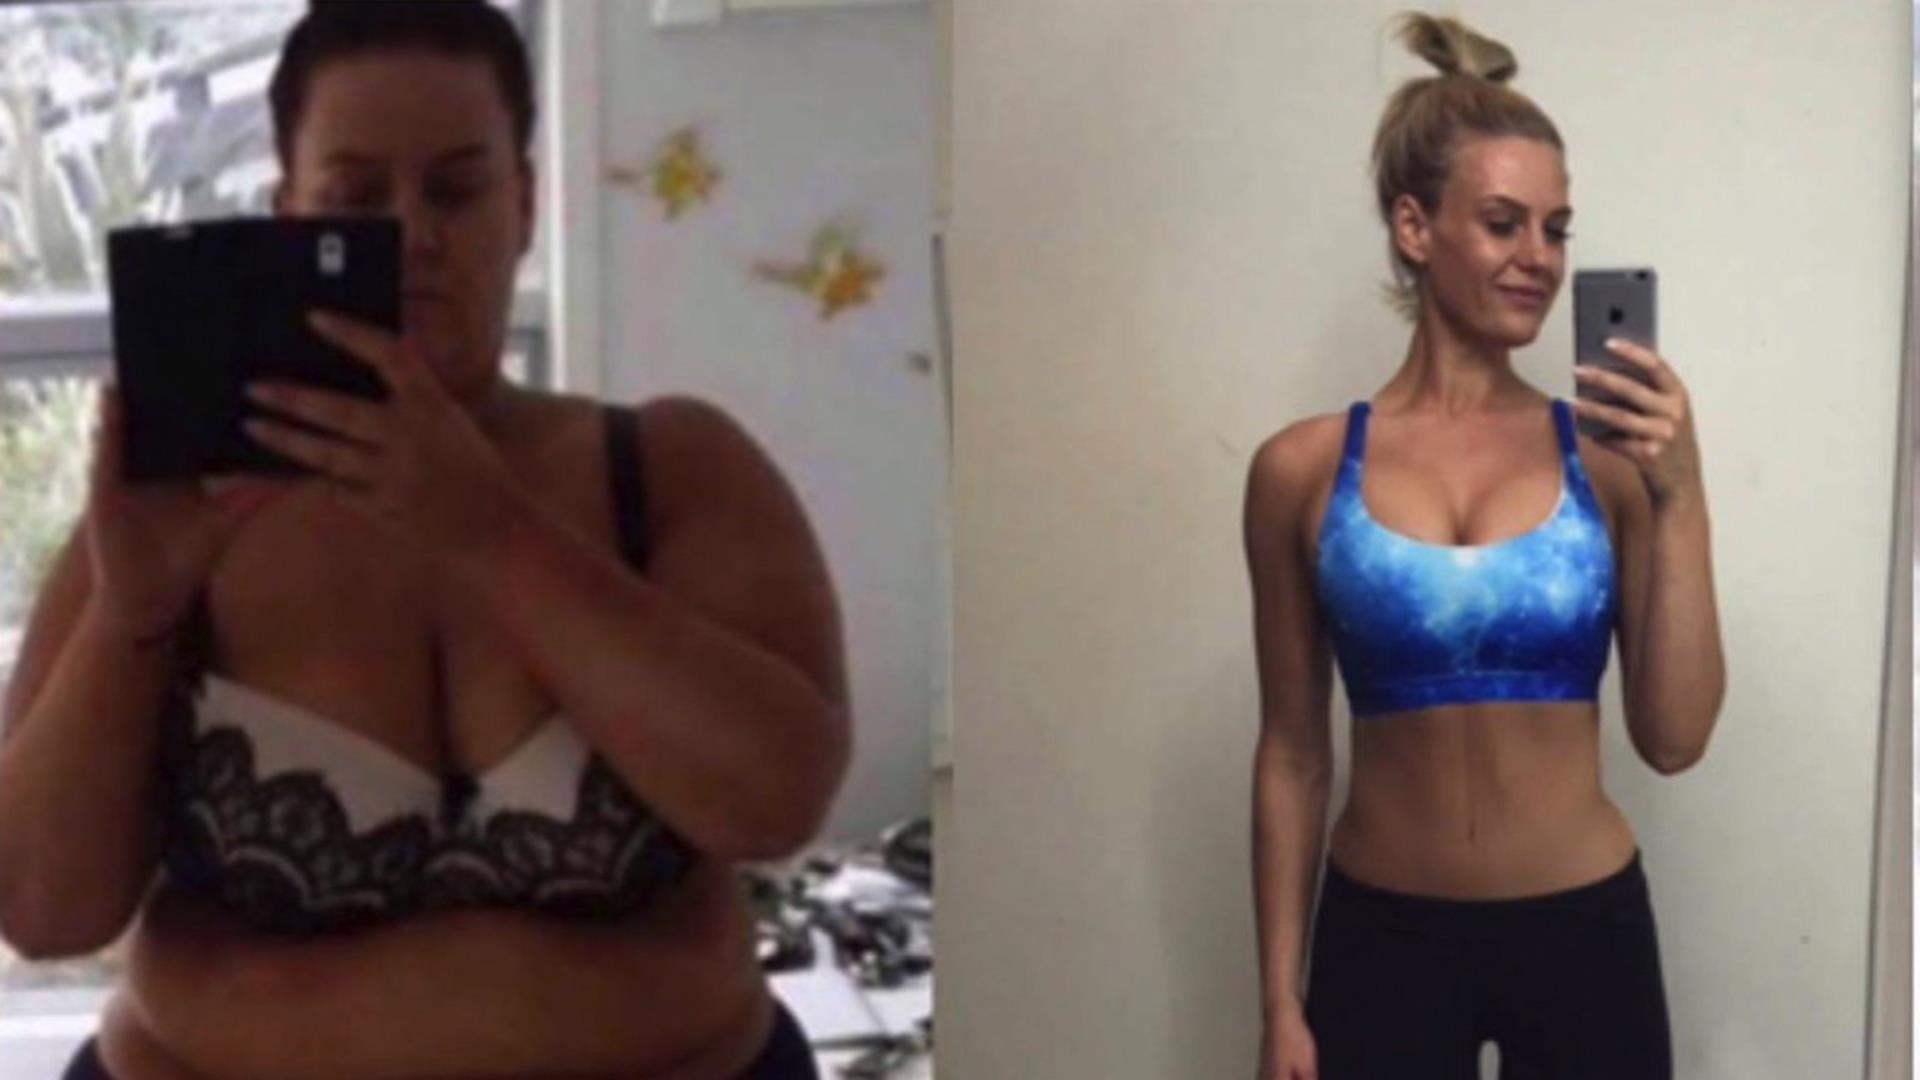 Simone Pretscherer accomplished her weight-loss goal in 11 months! 